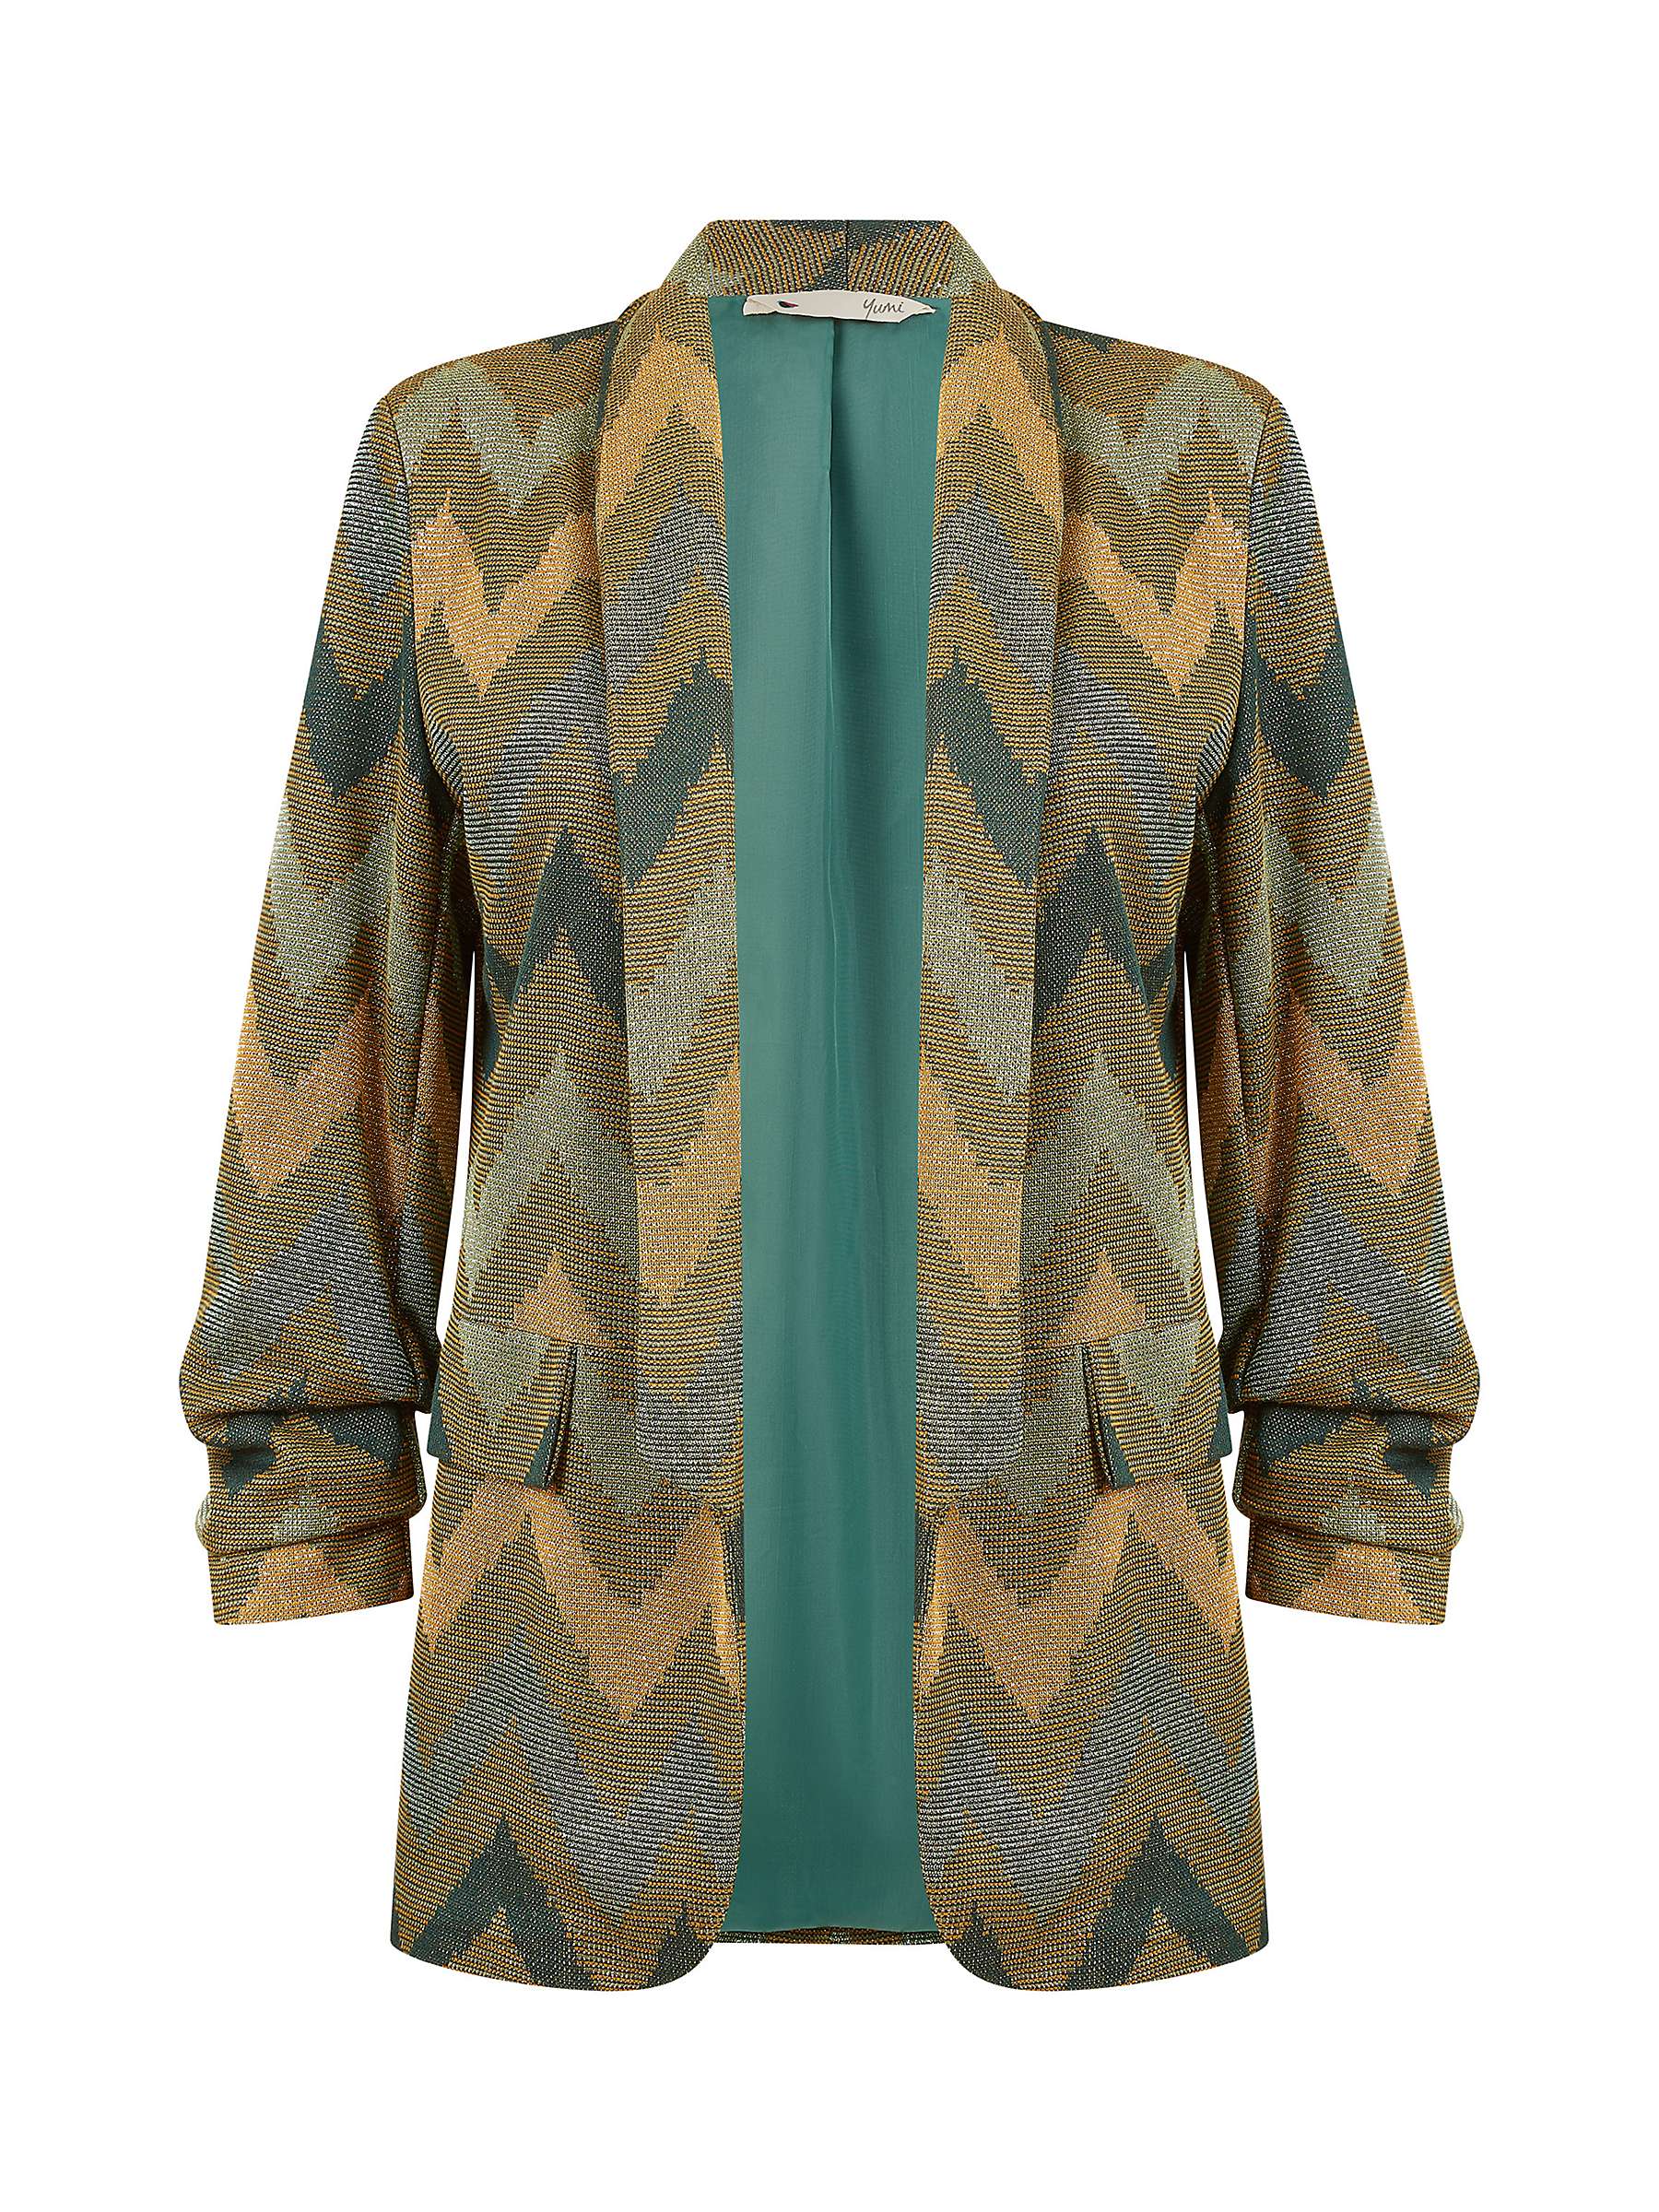 Buy Yumi Chevron Relaxed Fit Blazer, Green/Multi Online at johnlewis.com